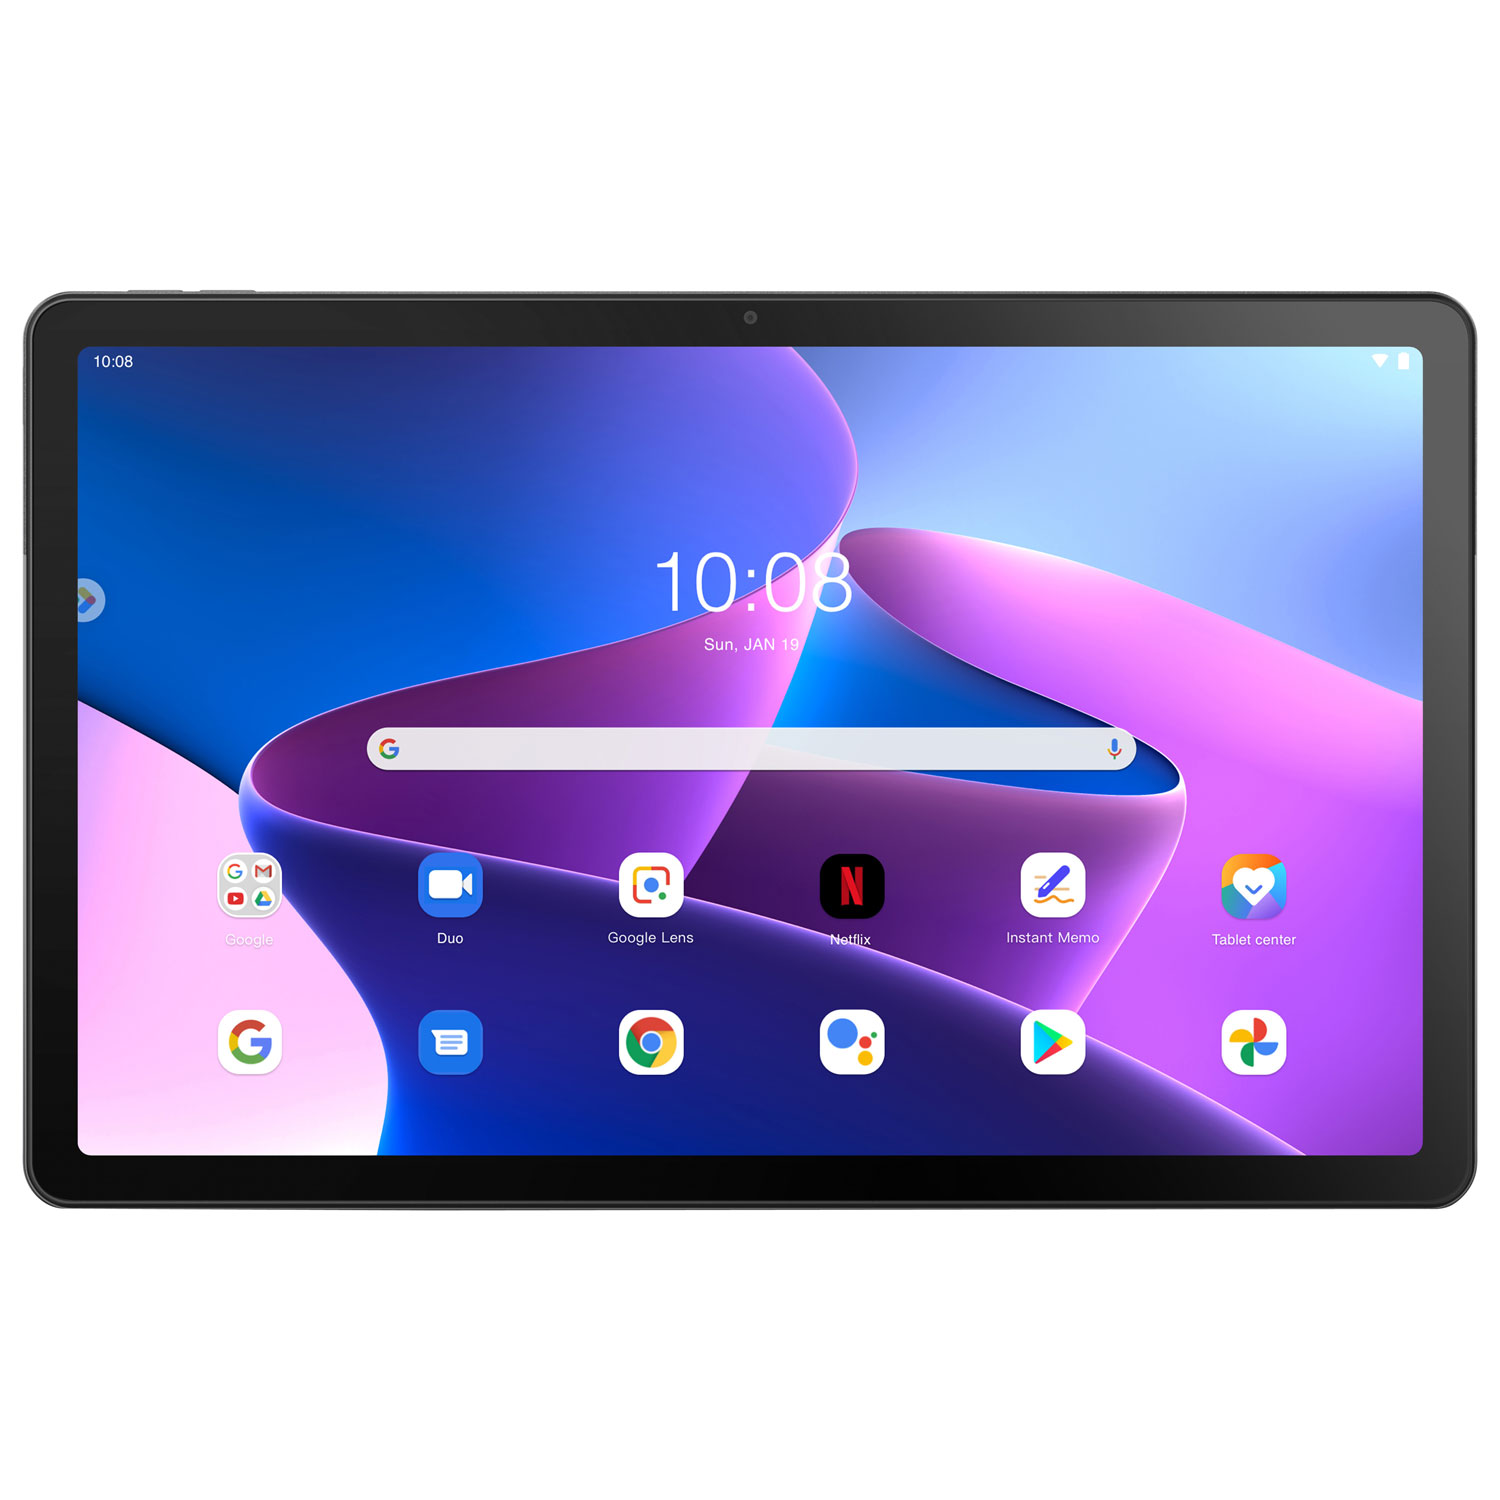 Lenovo Tab M10 Plus 10.6" 128GB Android 12 S Tablet with MediaTek G80 8-Core Processor - Storm Grey